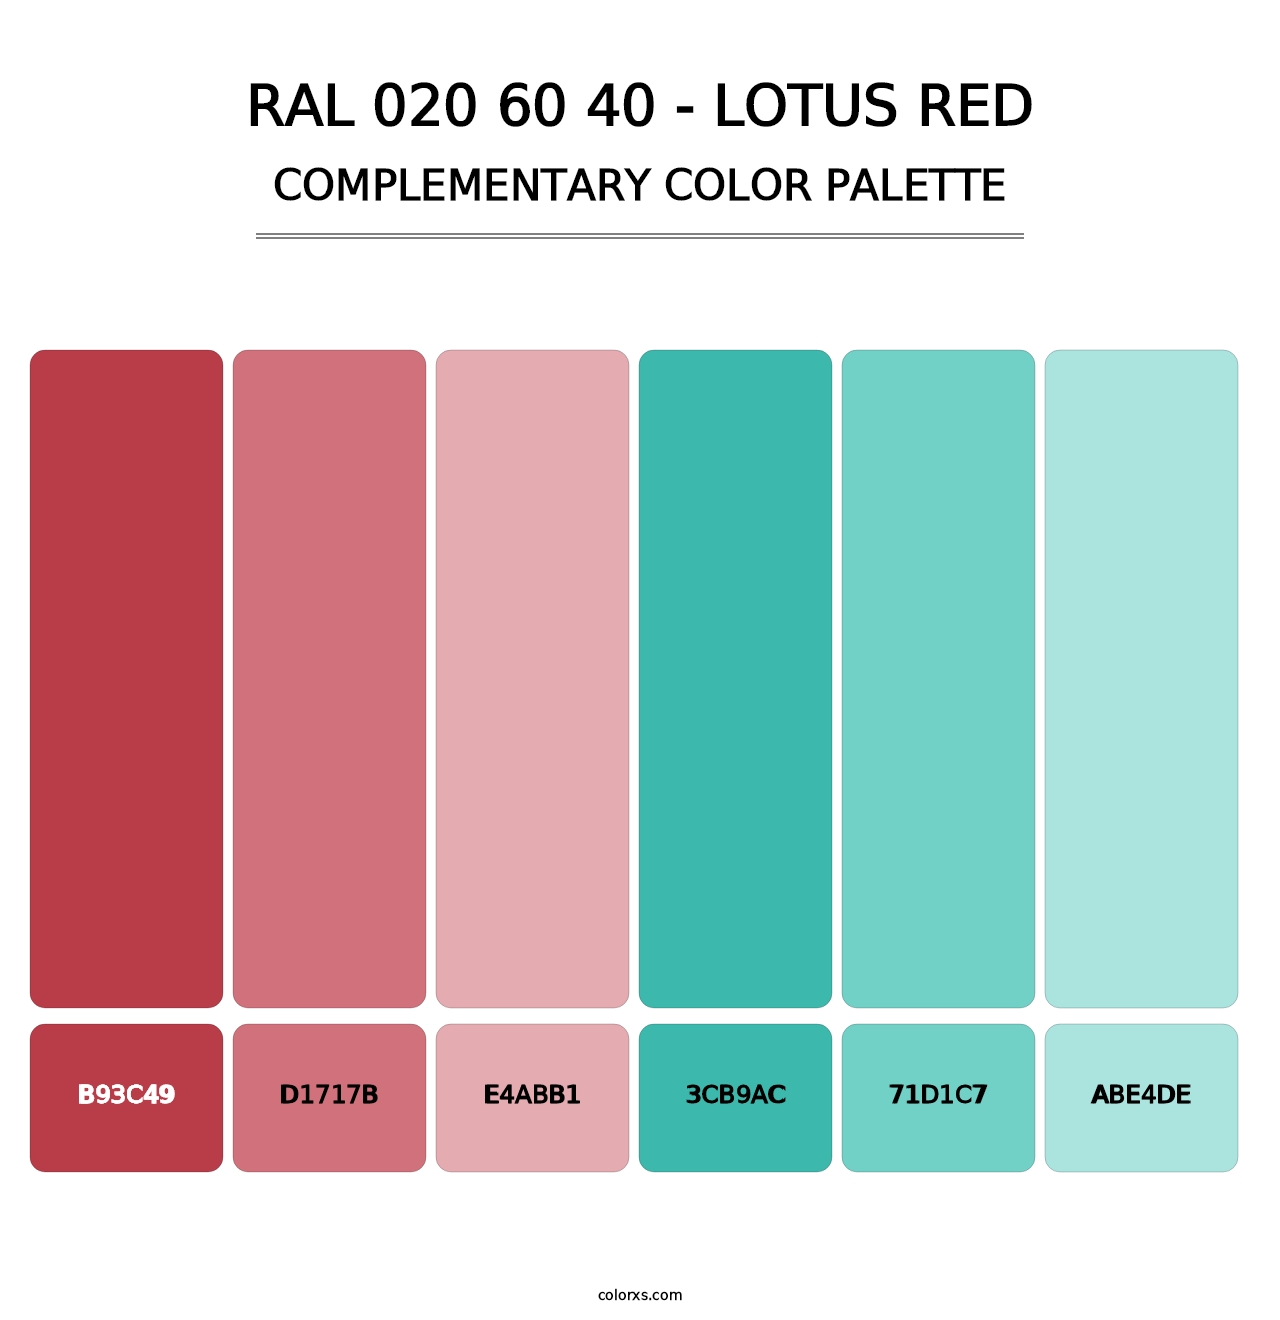 RAL 020 60 40 - Lotus Red - Complementary Color Palette